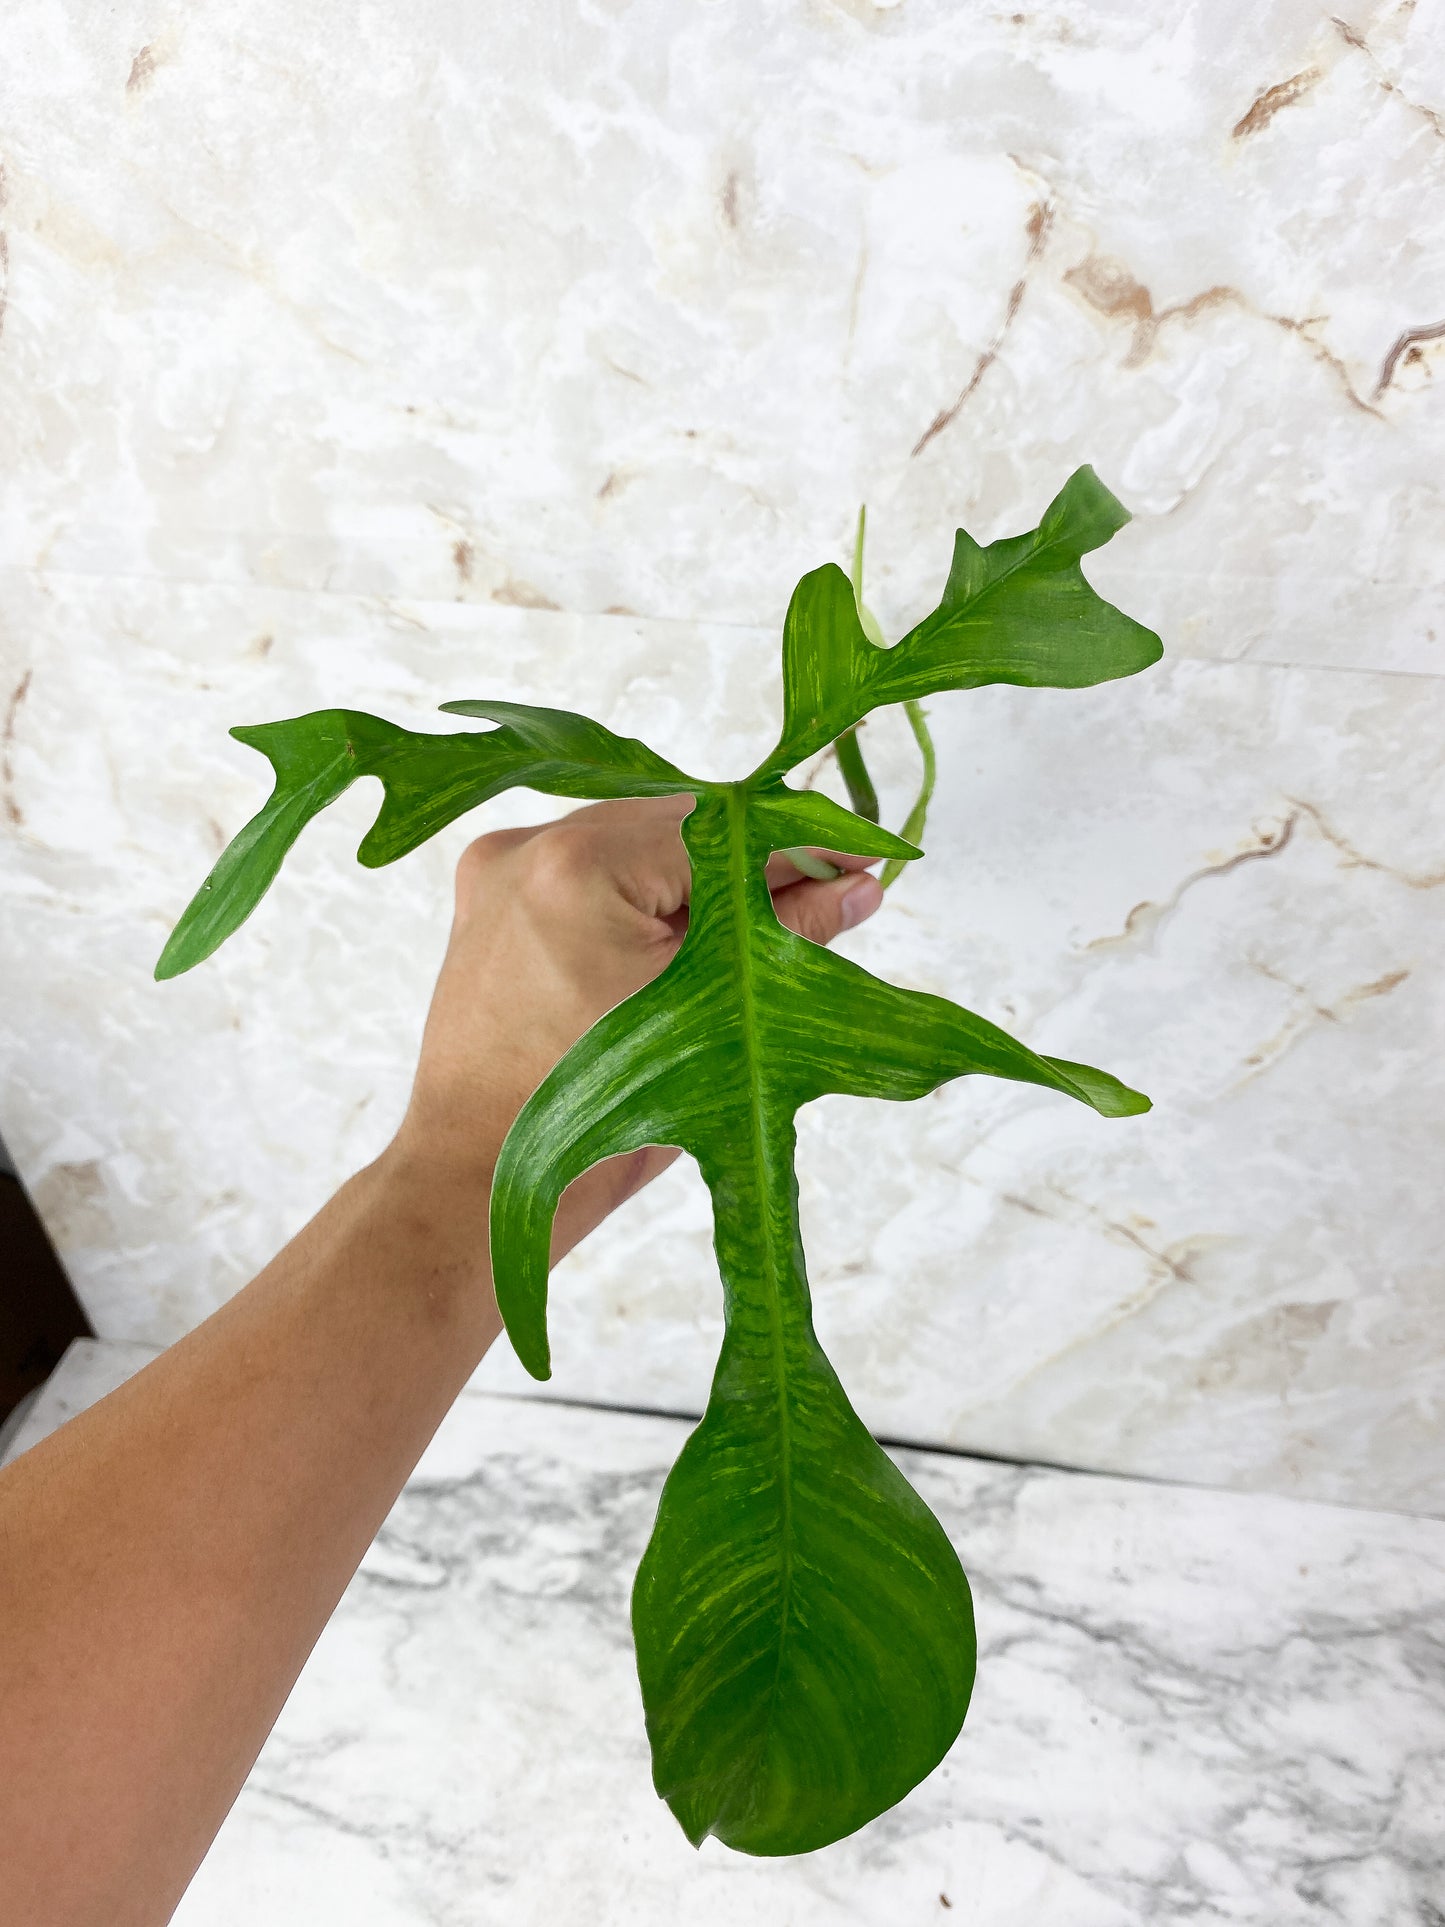 Philodendron Glad Hand Rooting Top cutting. 2 leaves, 1 sprout